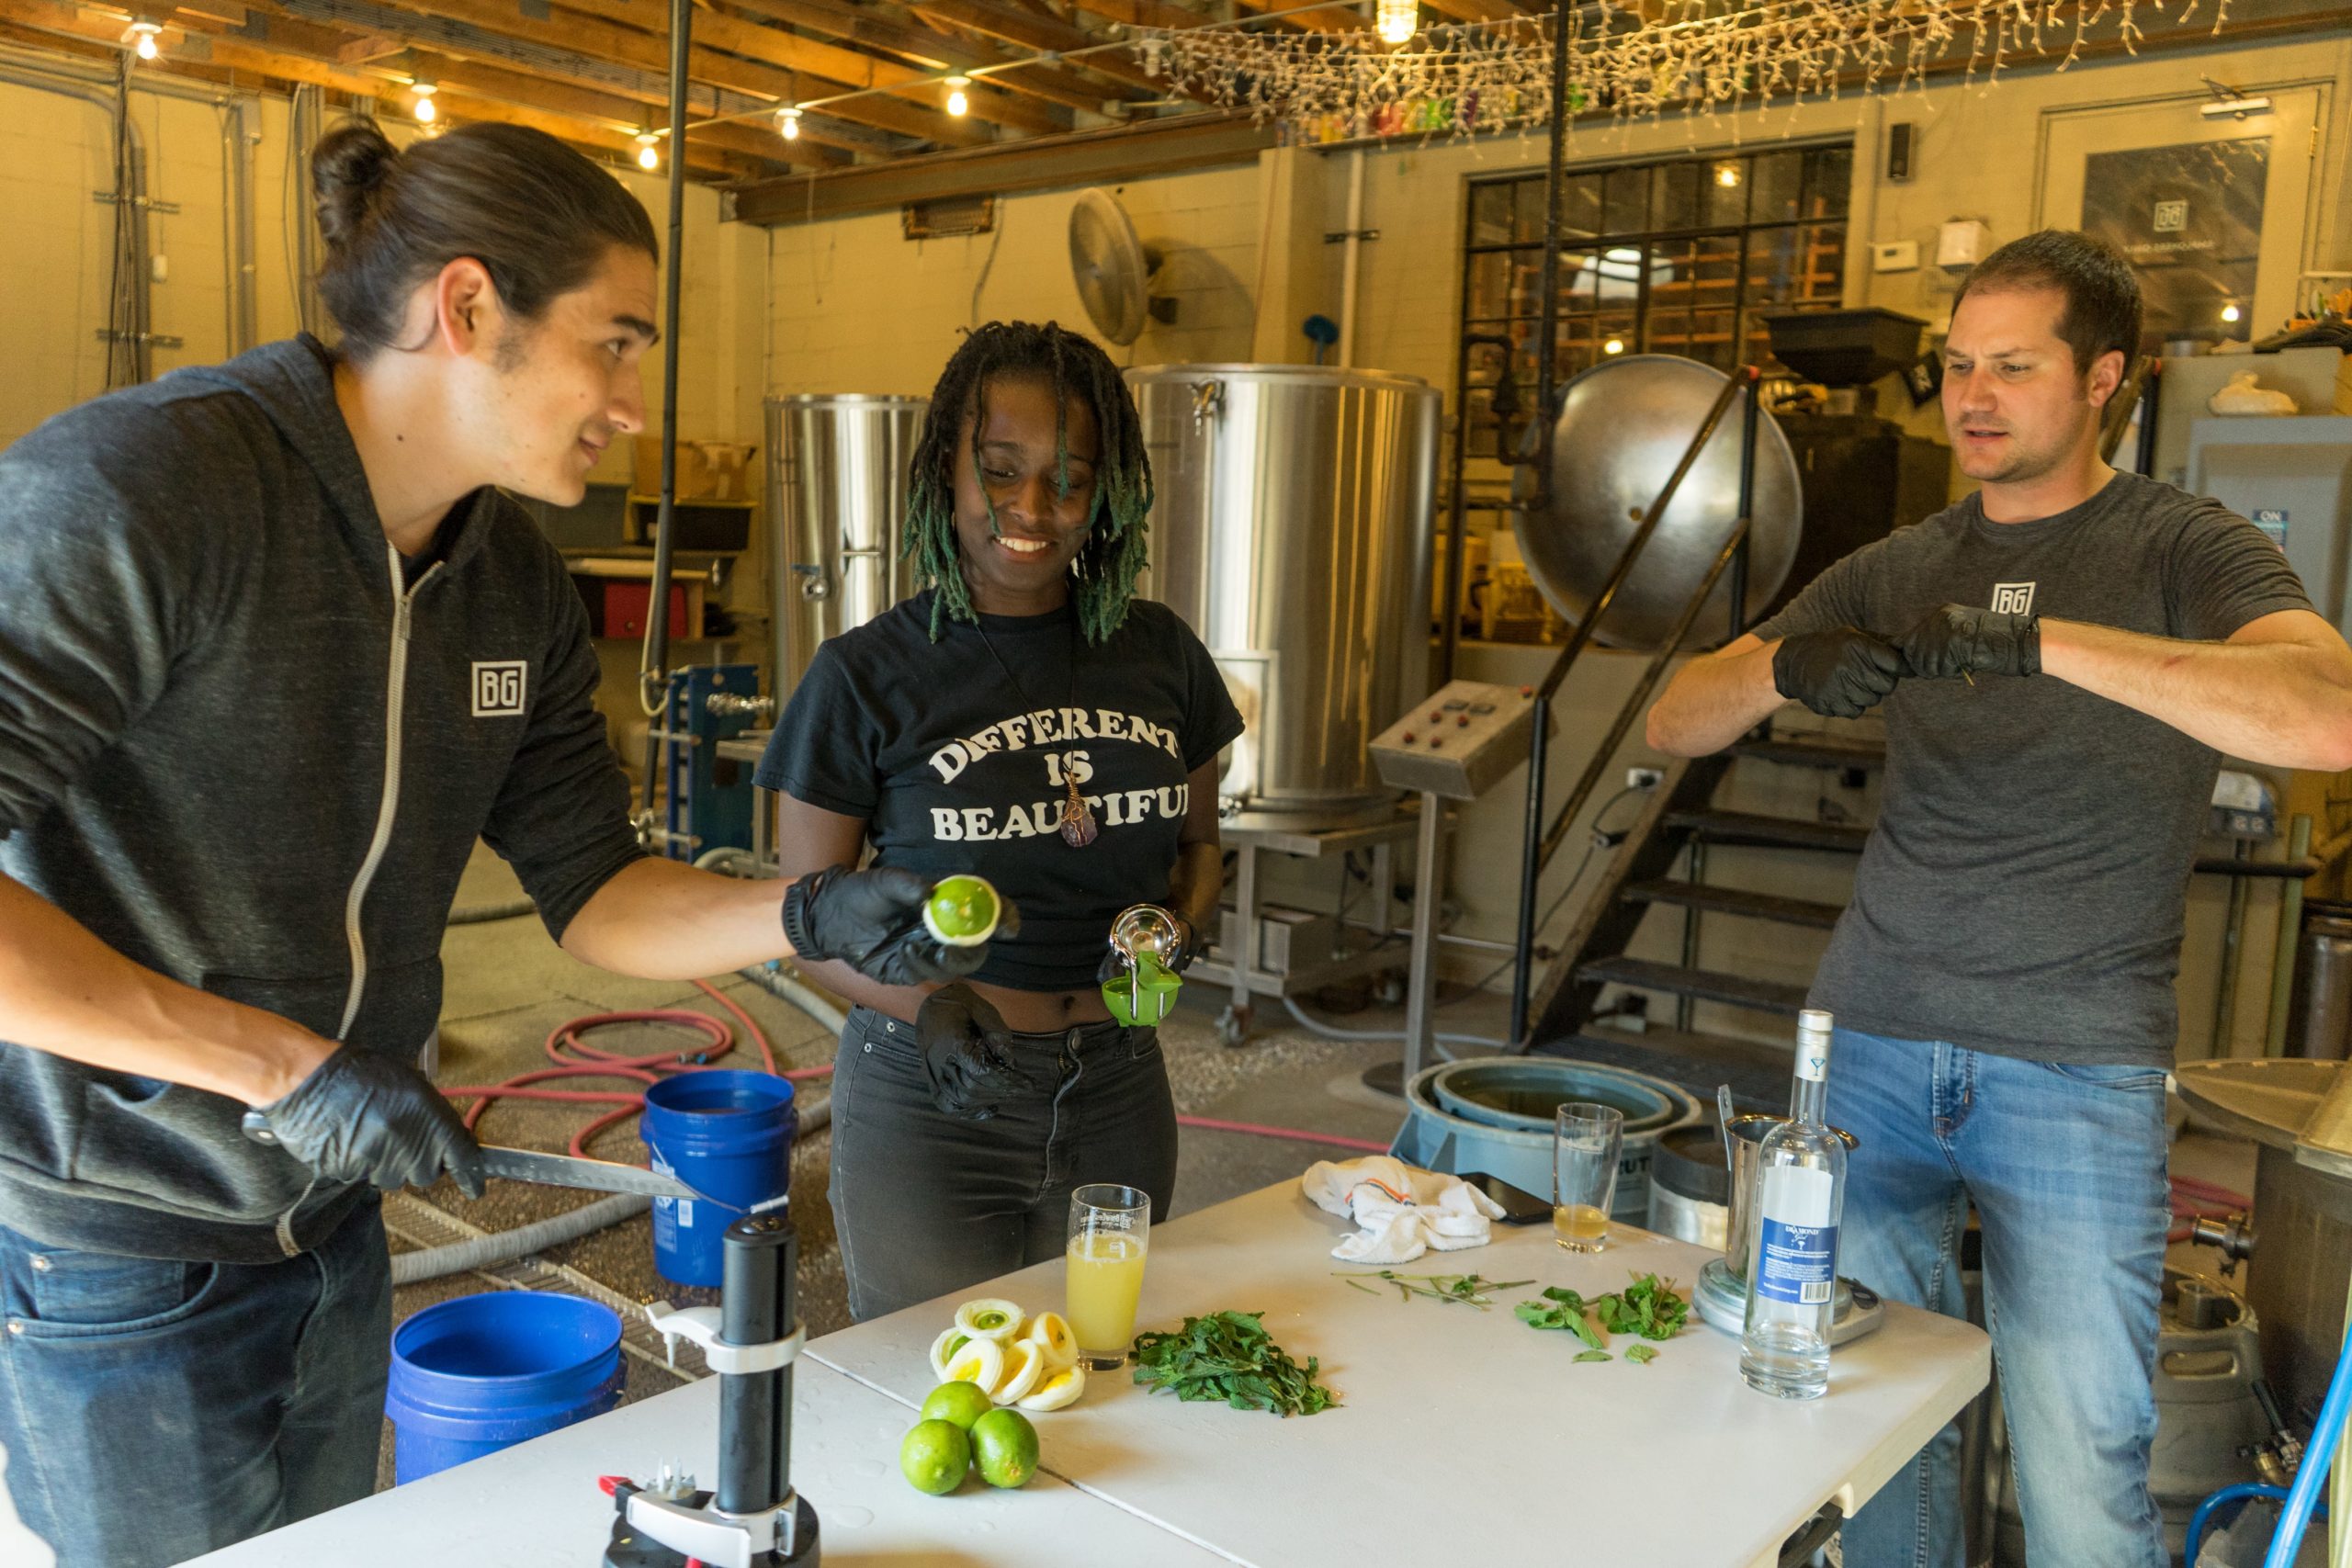 Chardae Jones, interim mayor of Braddock (center) working alongside the Brew Gentlemen team on their collaboration beer that will debut at Fresh Fest on Aug. 10. Photo: Brian Conway